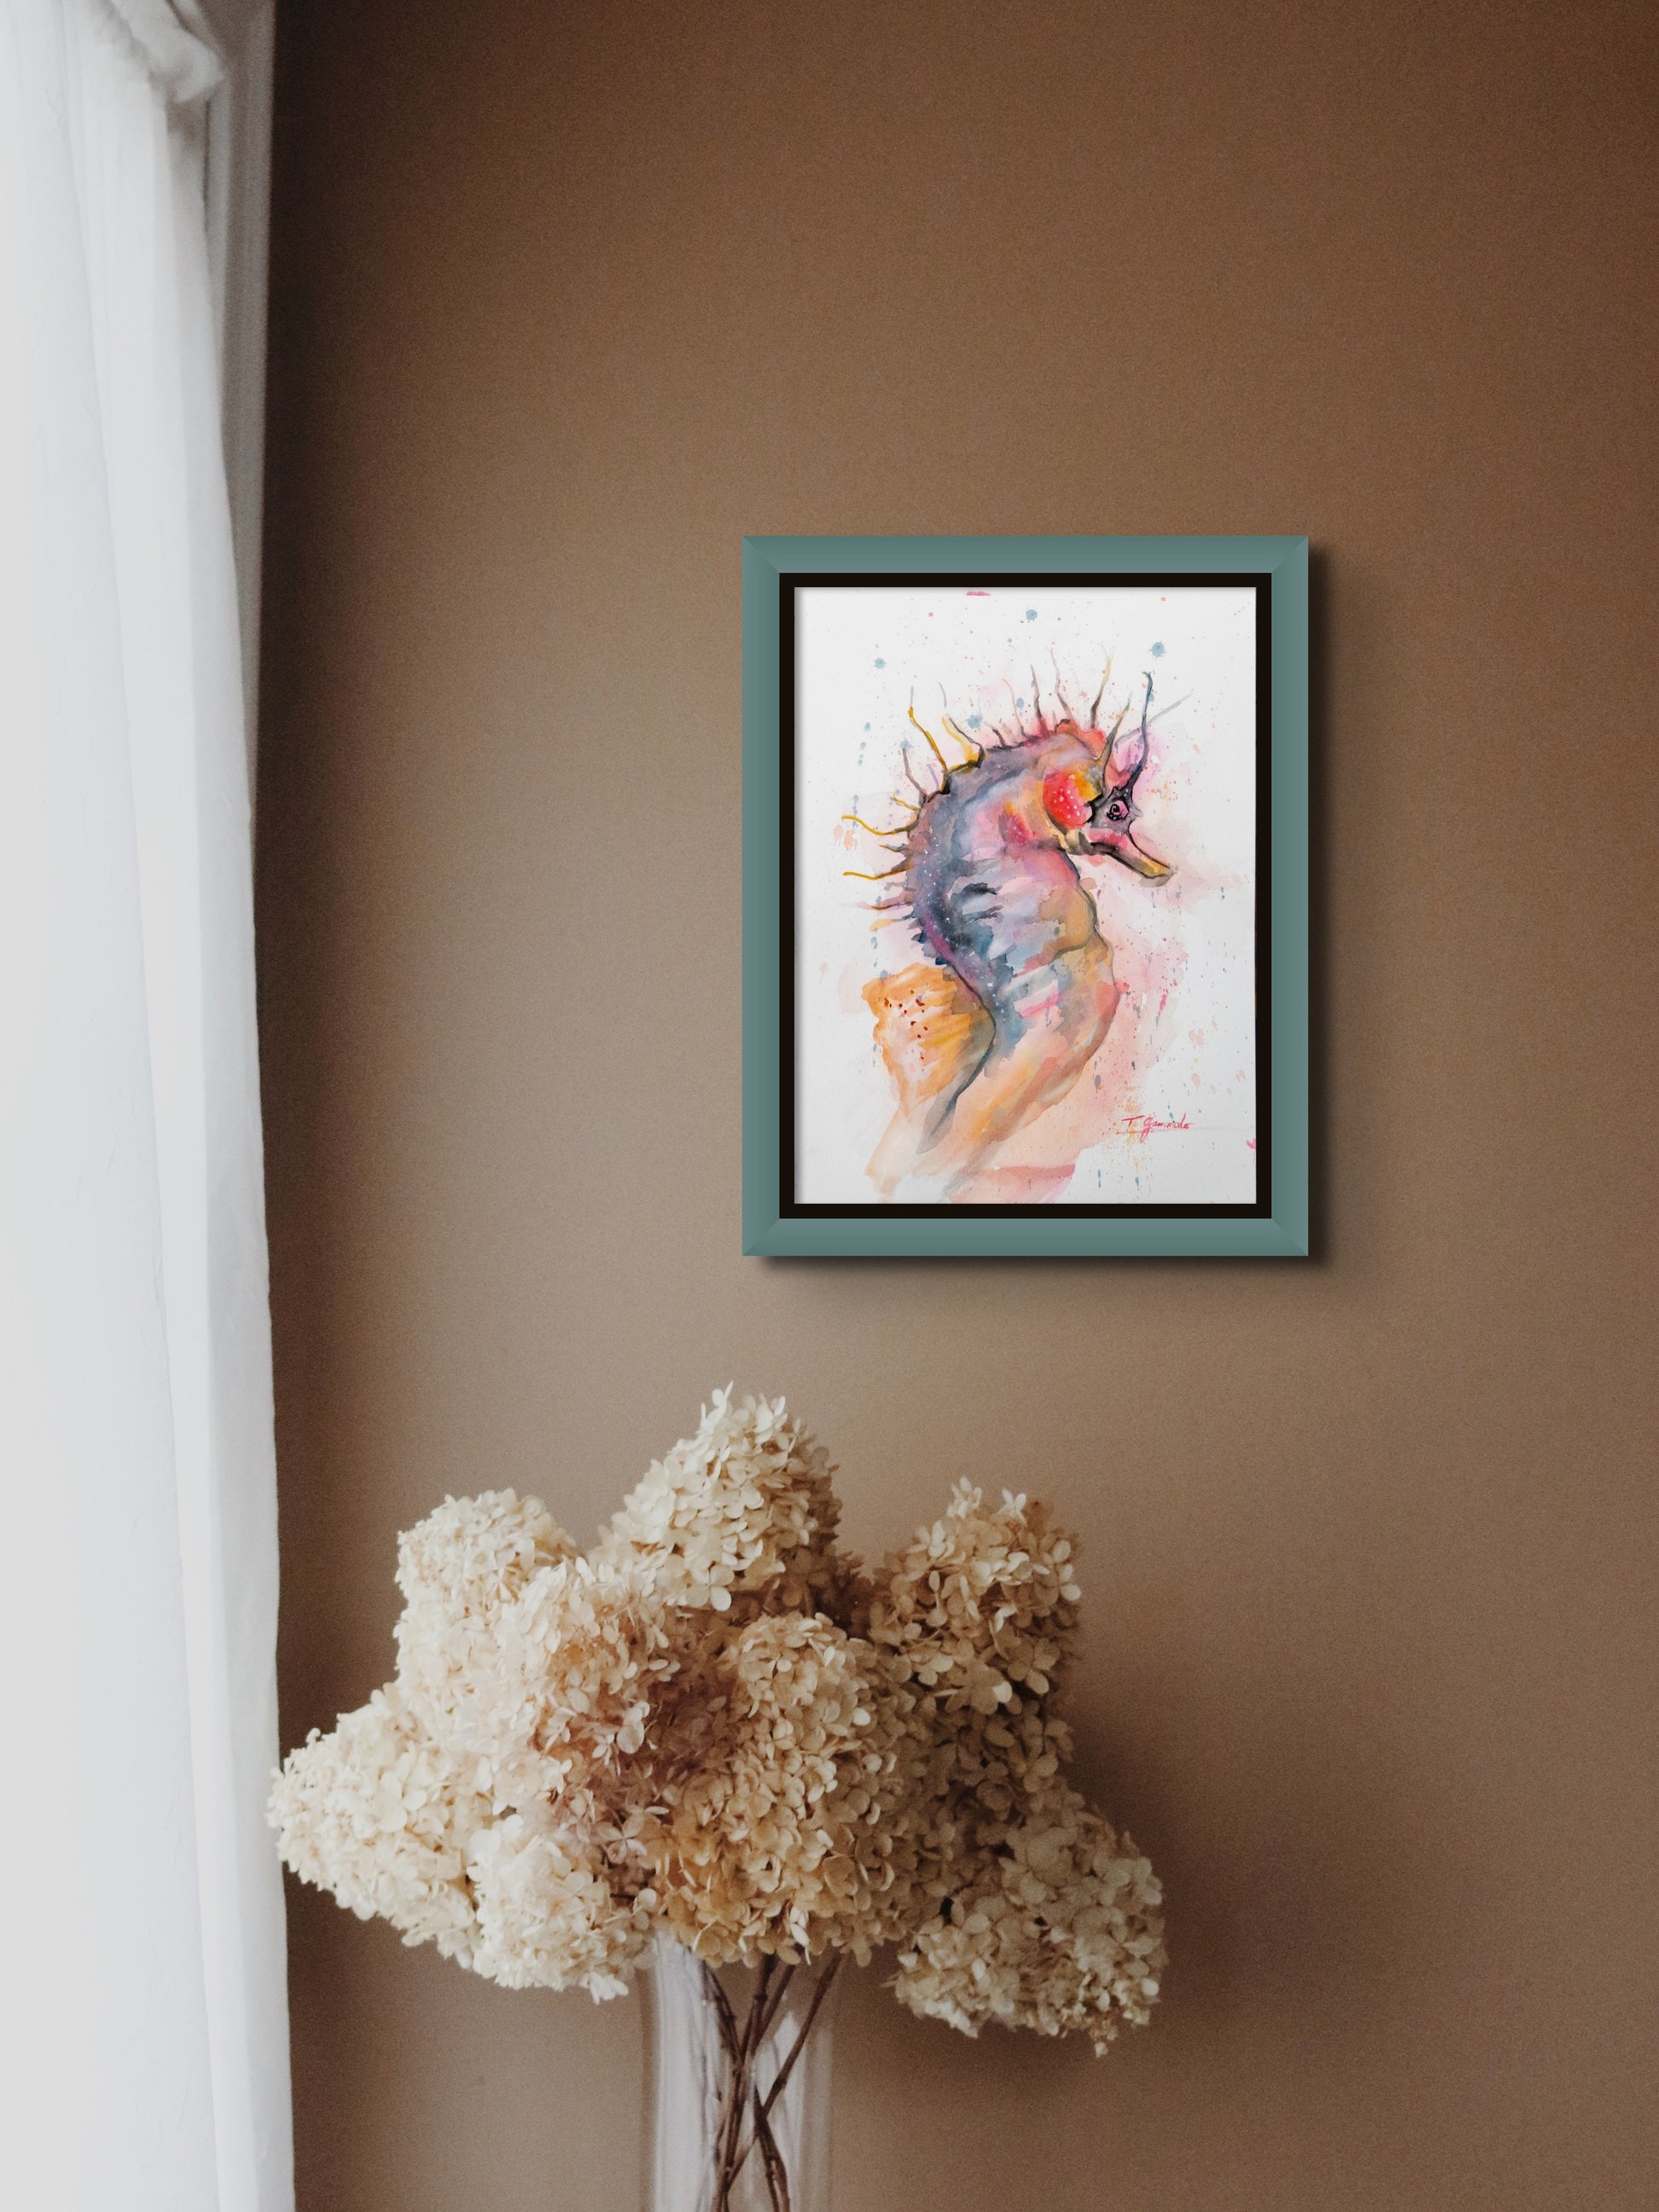 Watercolor painting of sea horse titled 'Horsing Around' by artist Teri Gammalo, floated against black background  with blue painted wood frame.